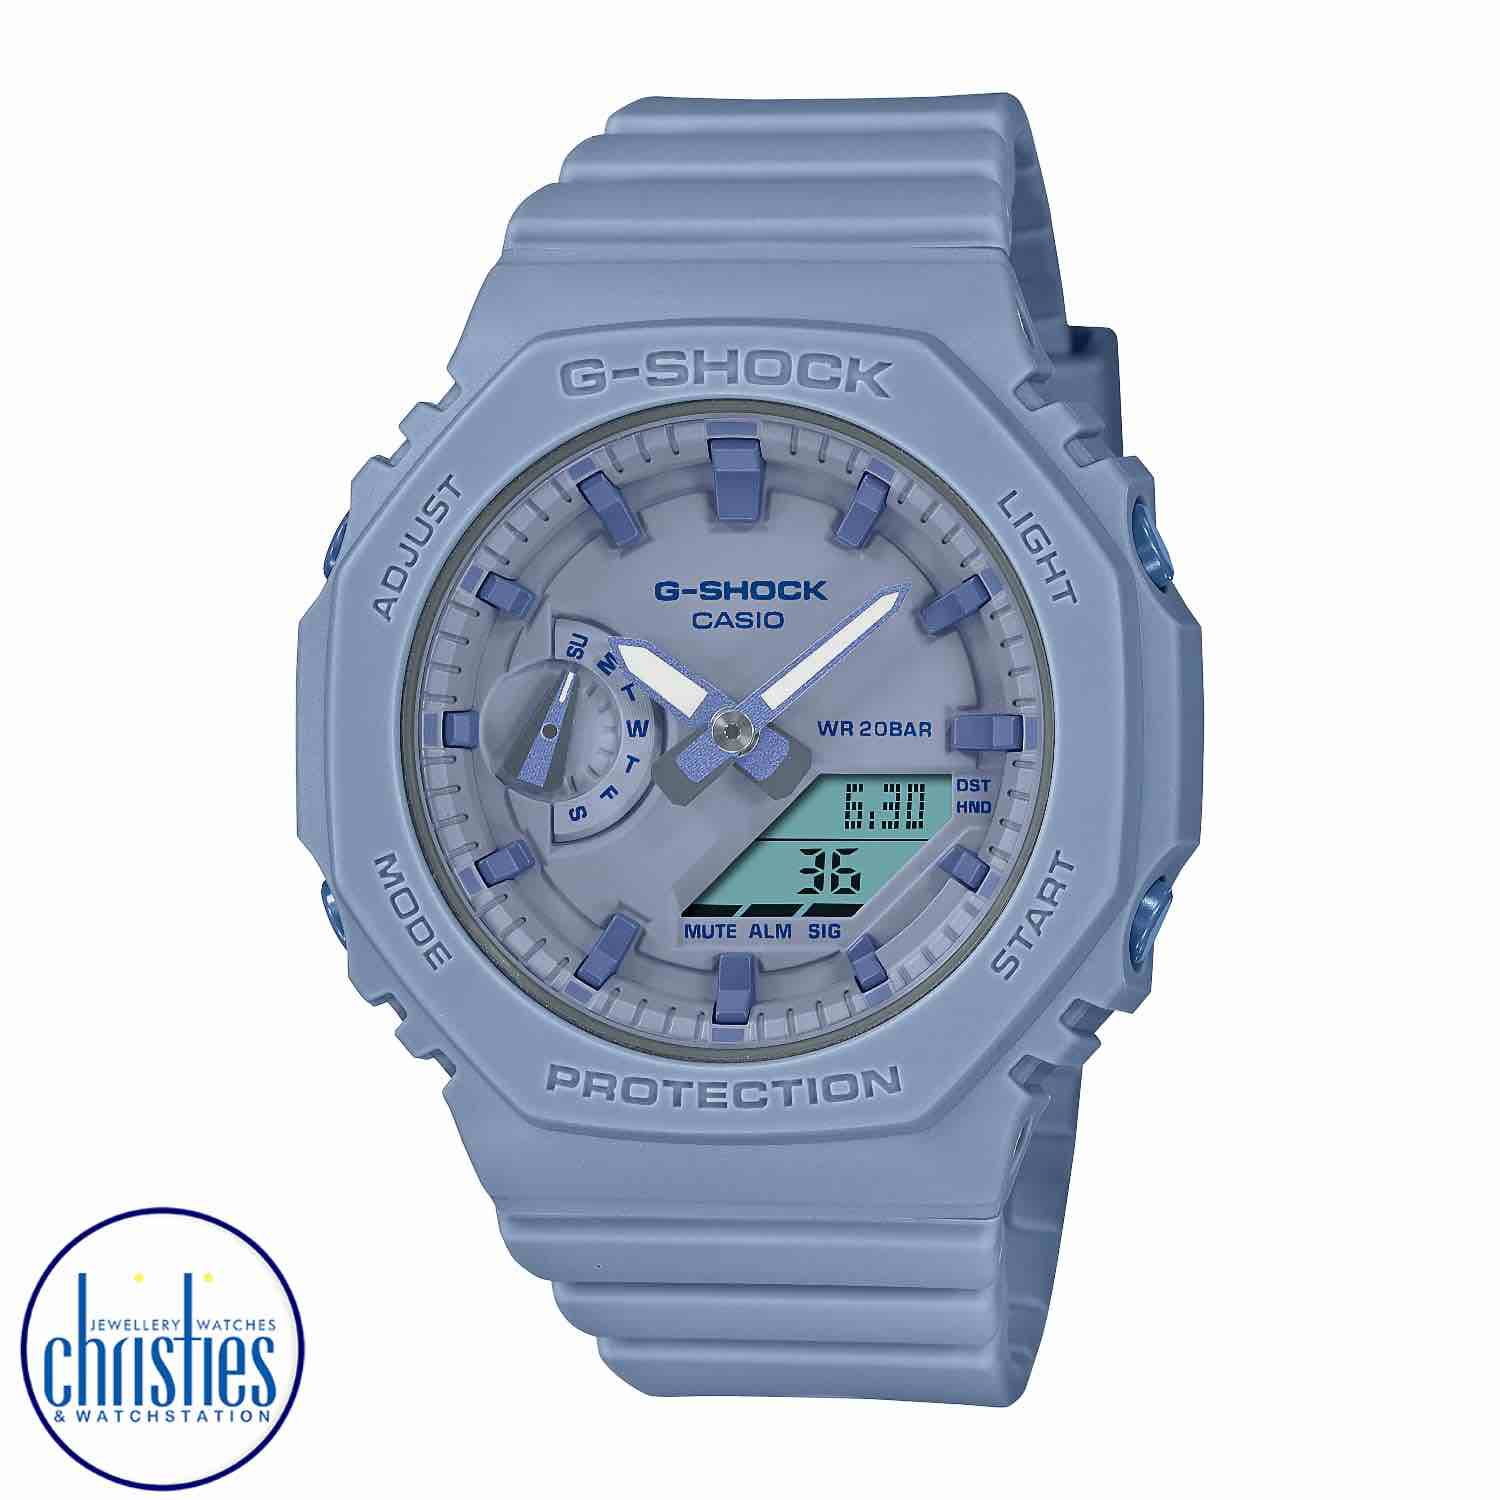 GMAS2100BA-2A2 Casio G-SHOCK  Womens Watch. Slip on a splash of clear metallic pleasure with the ever-popular analog-digital combination GA-2100 in a slimmer, more compact profile. g-shock watch strap replacement nz